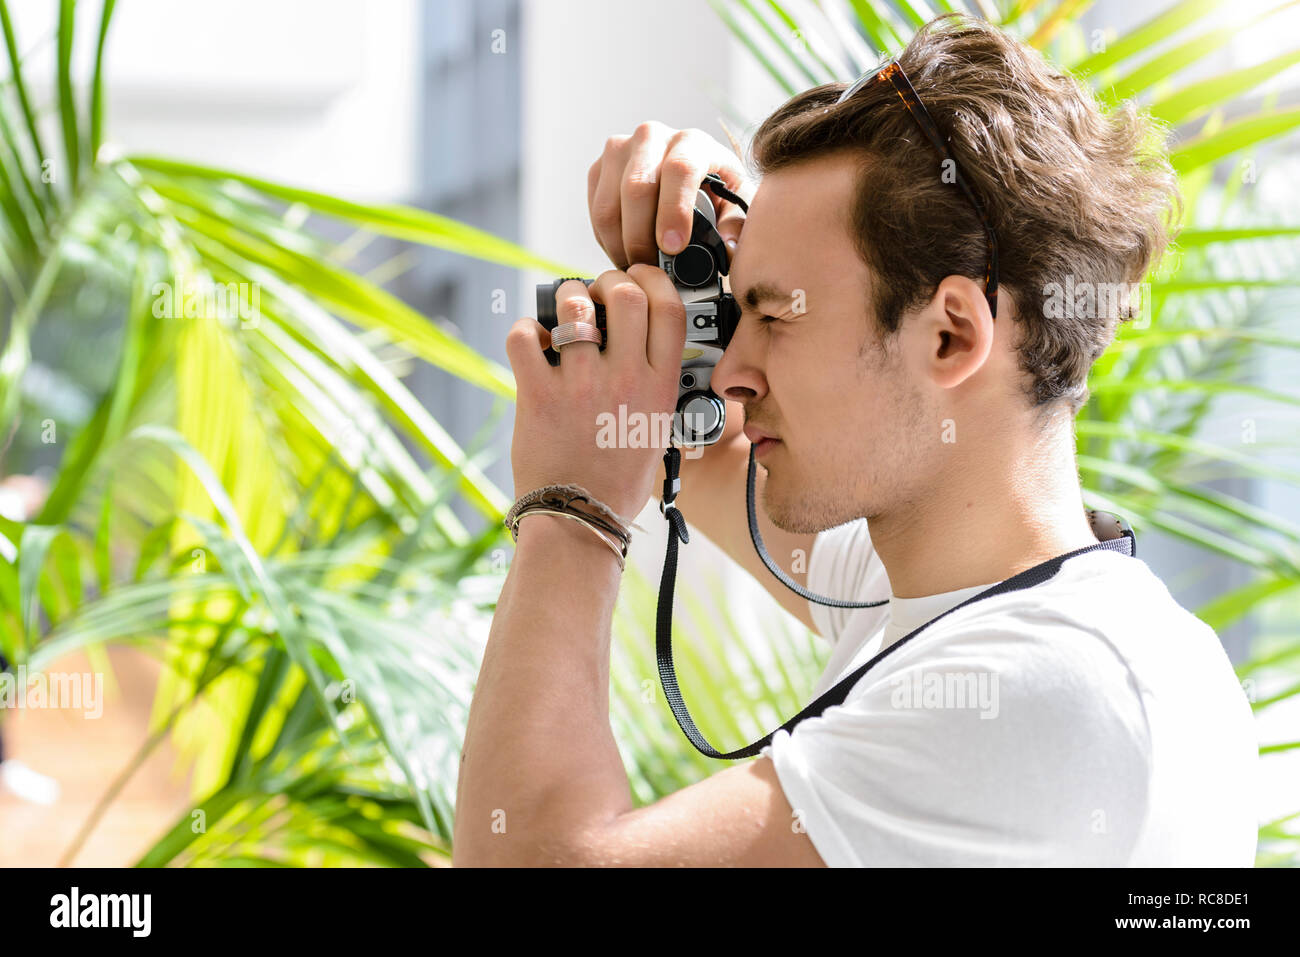 Man taking photo, palm plant in background Stock Photo